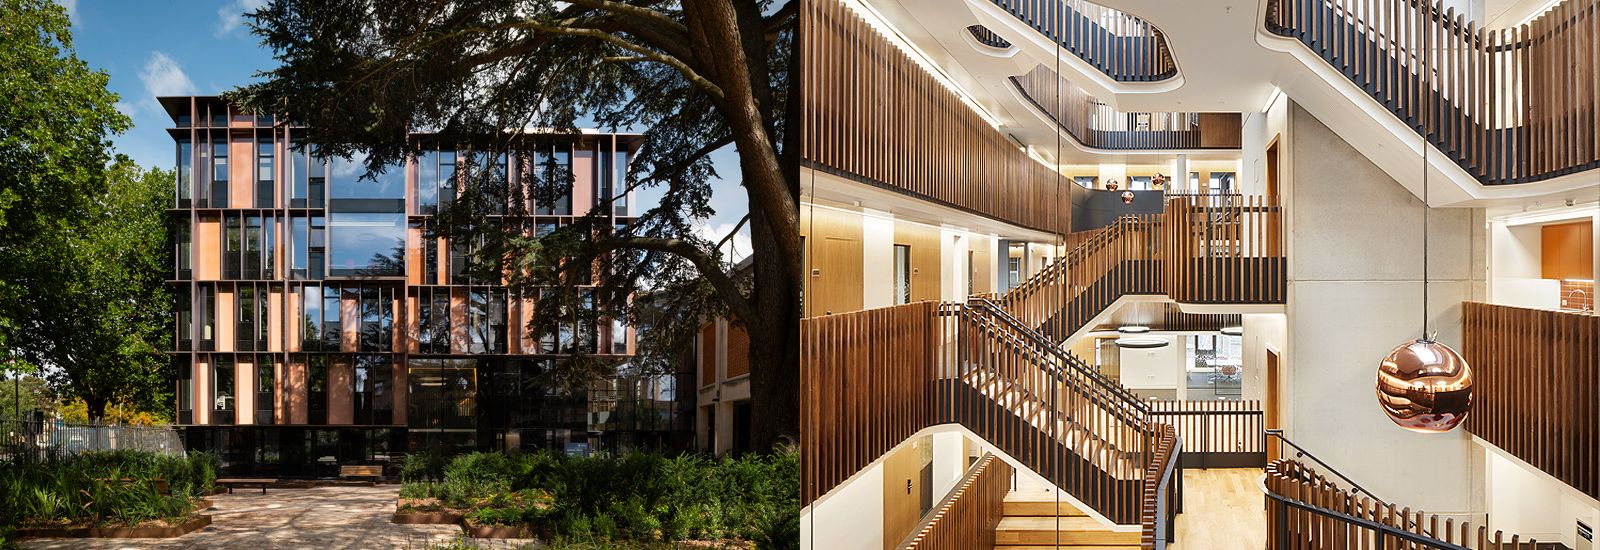 Exterior and interior views of the Beecroft Building